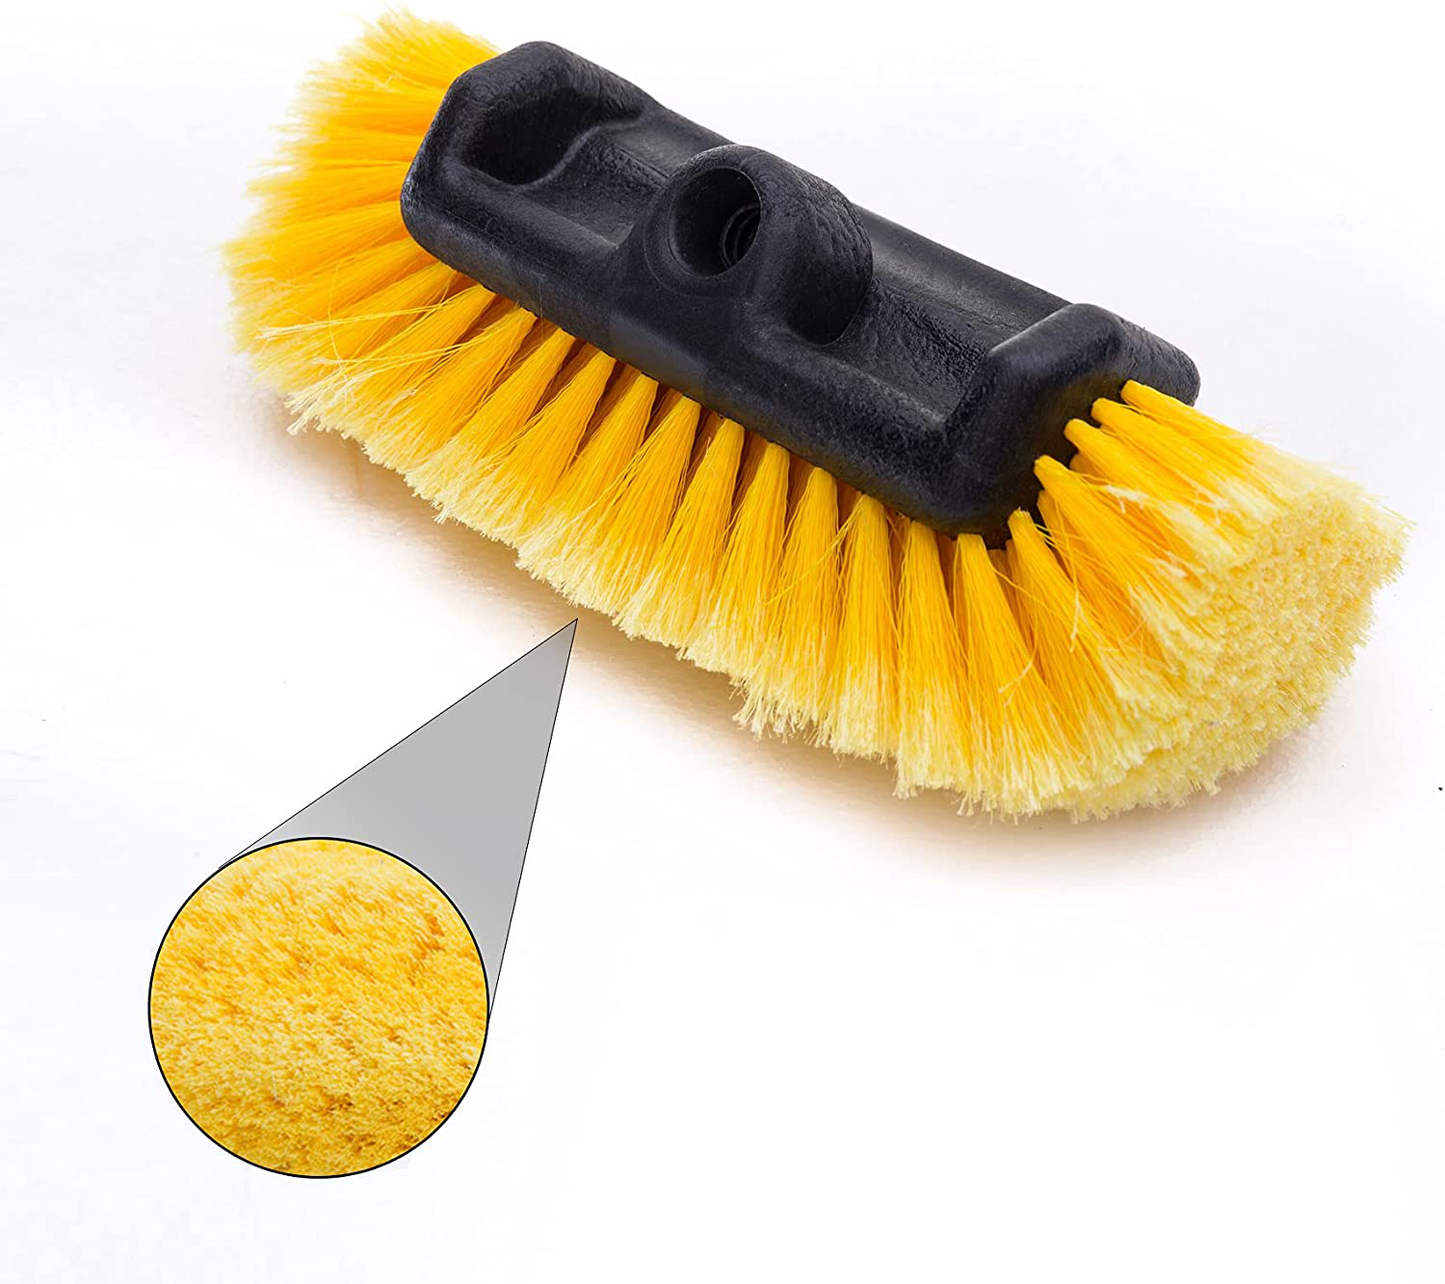 Car Wash Brush with Long Handle(5FT-12FT),12" Yellow Brush Head,Water Flow Extension Pole with an ON/OFF Switch,Car Washing Brush with Hose Attachment for Car,Truck,SUV,RV and Other Surface Cleaning